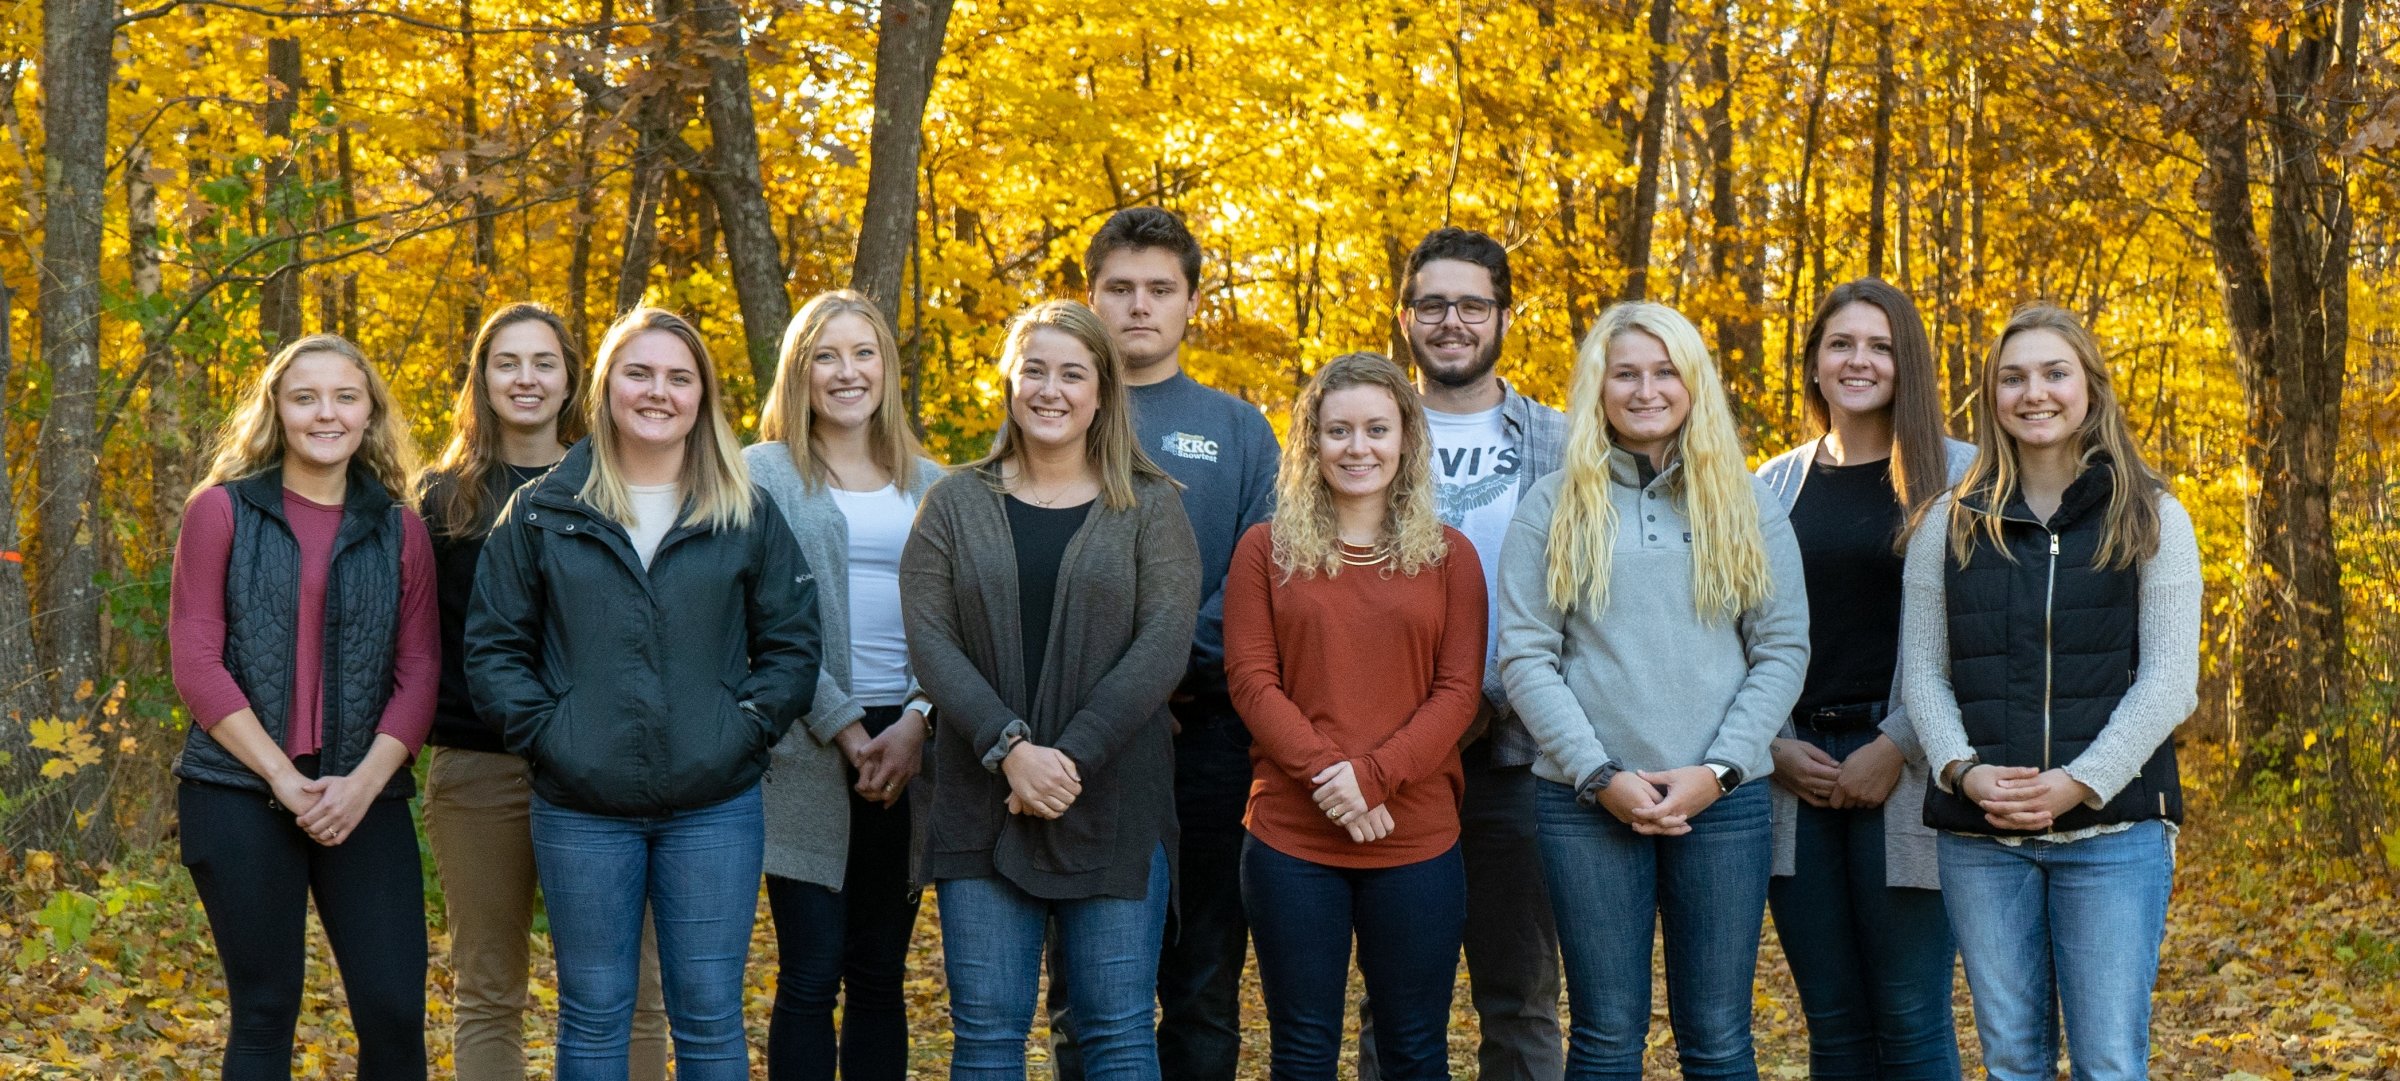 Eleven young people stand in two rows in a fall forest outside smiling and looking at the camera. They are scholarship recipients.